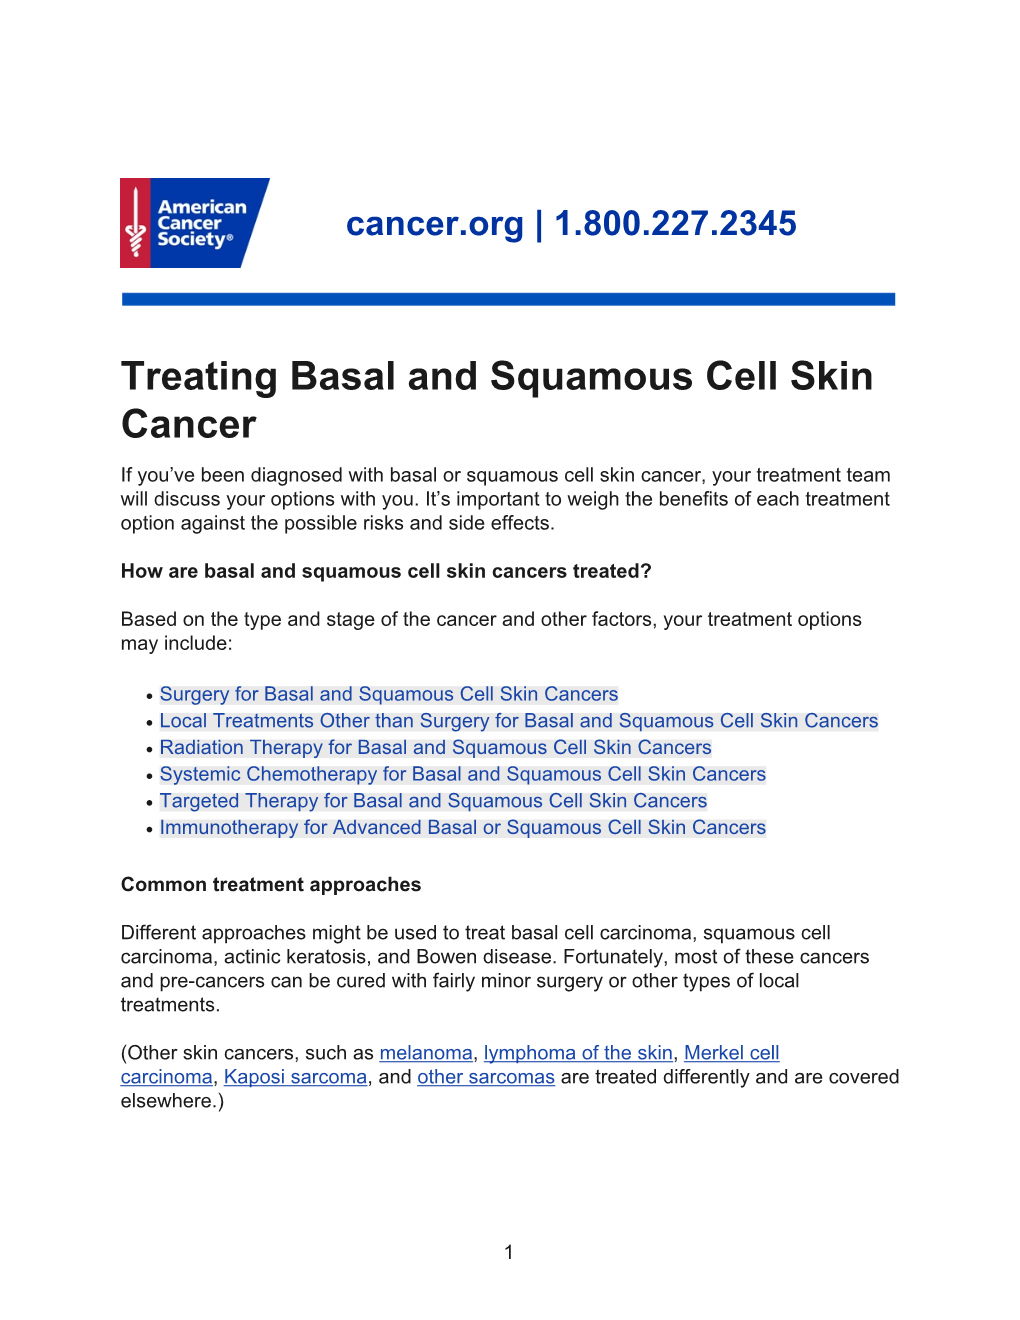 Treating Basal and Squamous Cell Skin Cancer If You’Ve Been Diagnosed with Basal Or Squamous Cell Skin Cancer, Your Treatment Team Will Discuss Your Options with You